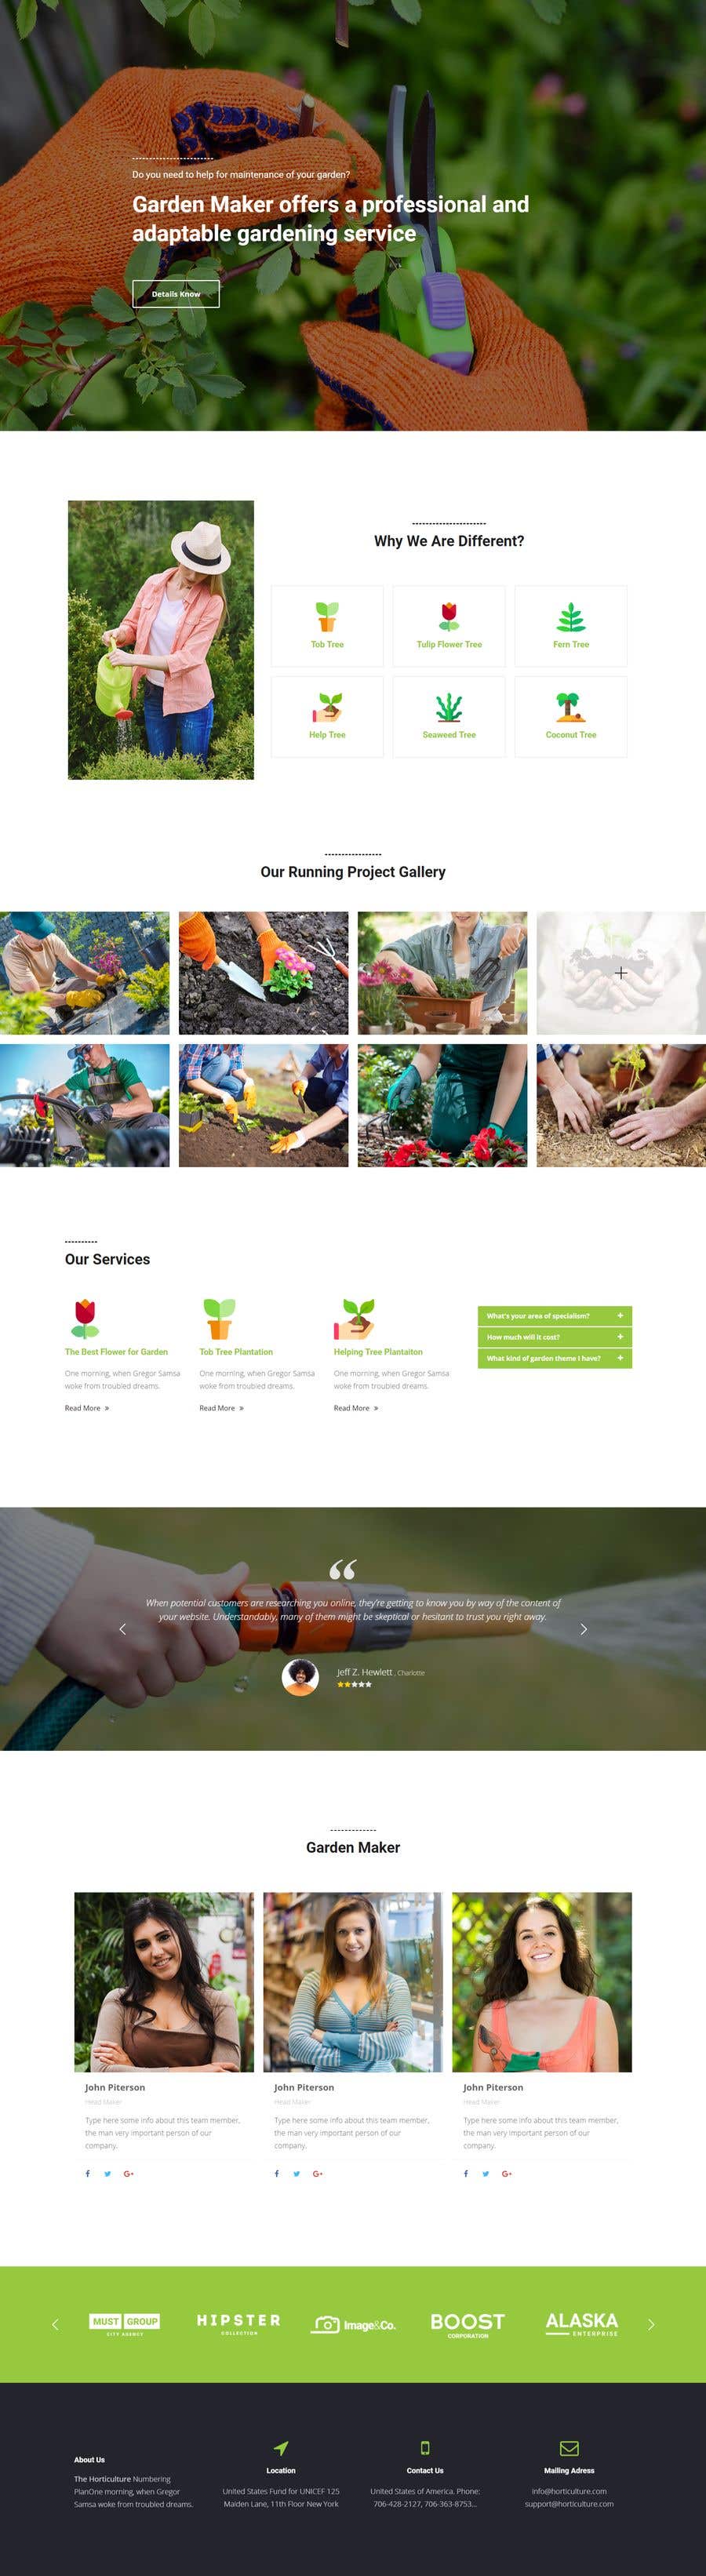 Kandidatura #13për                                                 Residential and Commercial landscape Management company requires website to be built
                                            